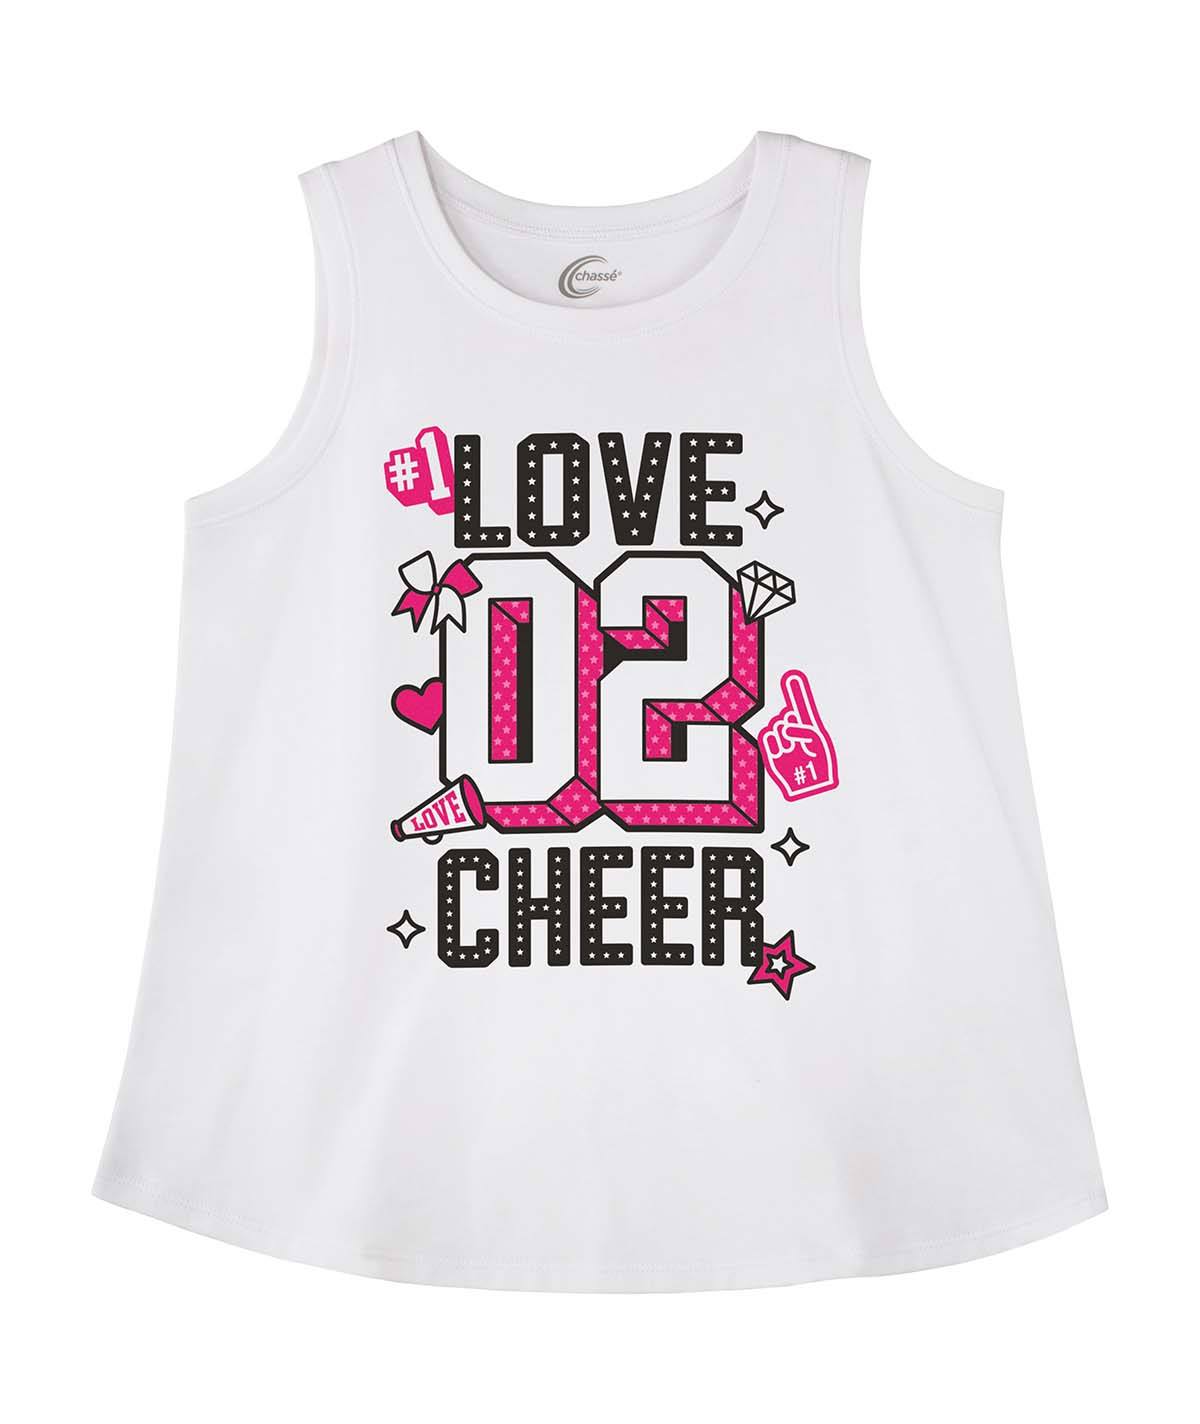 Chasse Love To Cheer Tank